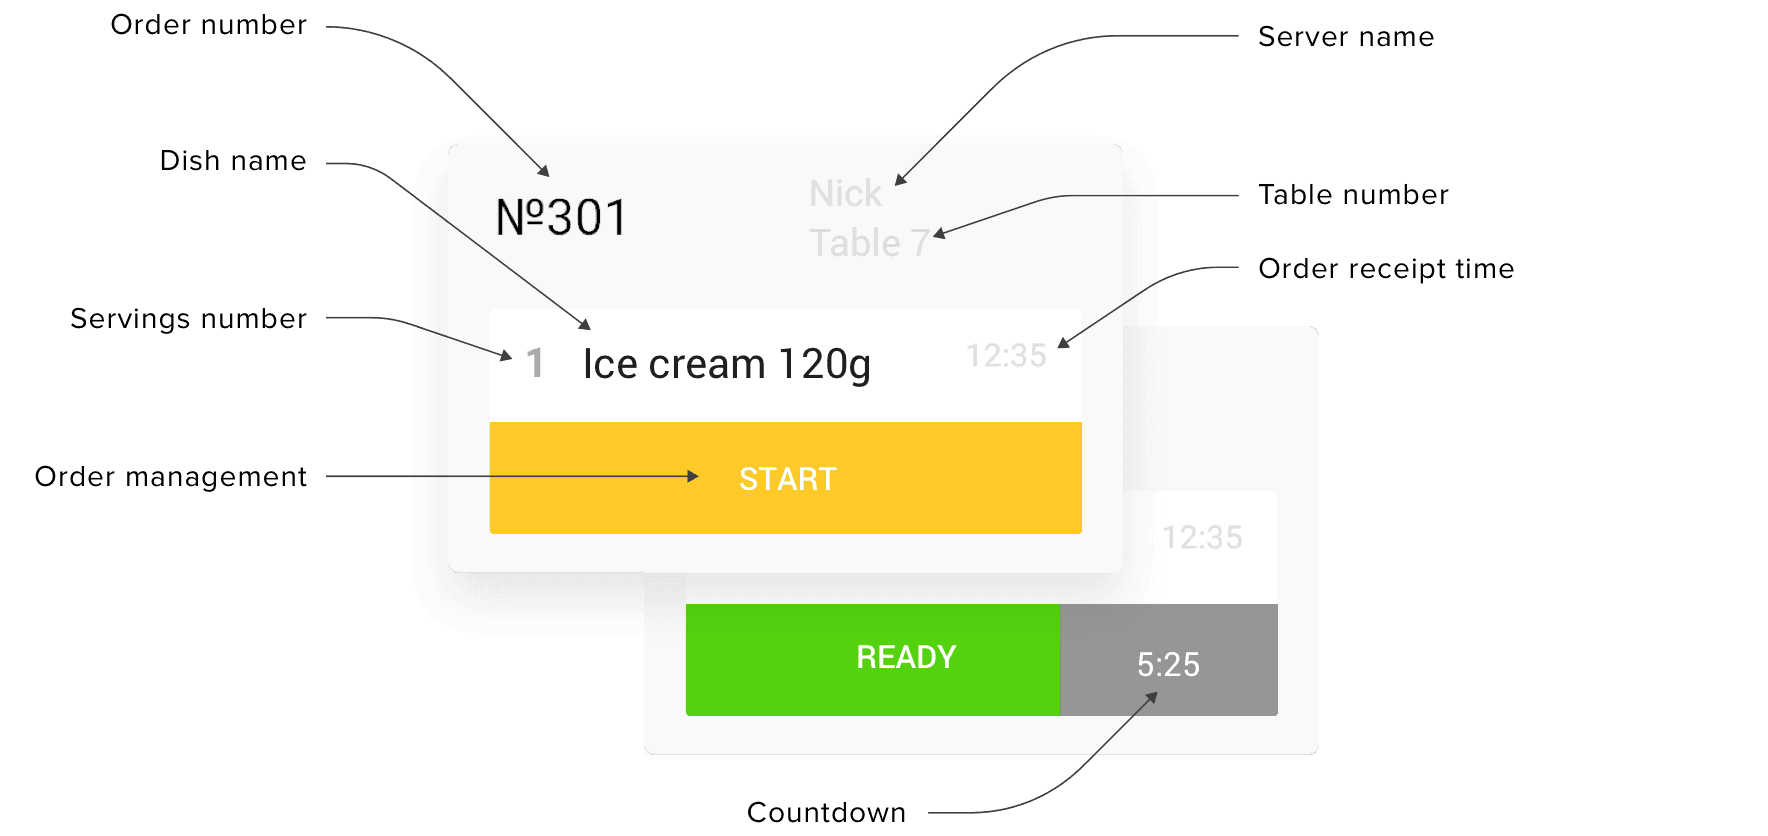 Kitchen Order Display System: Real-Time Kitchen Tracking